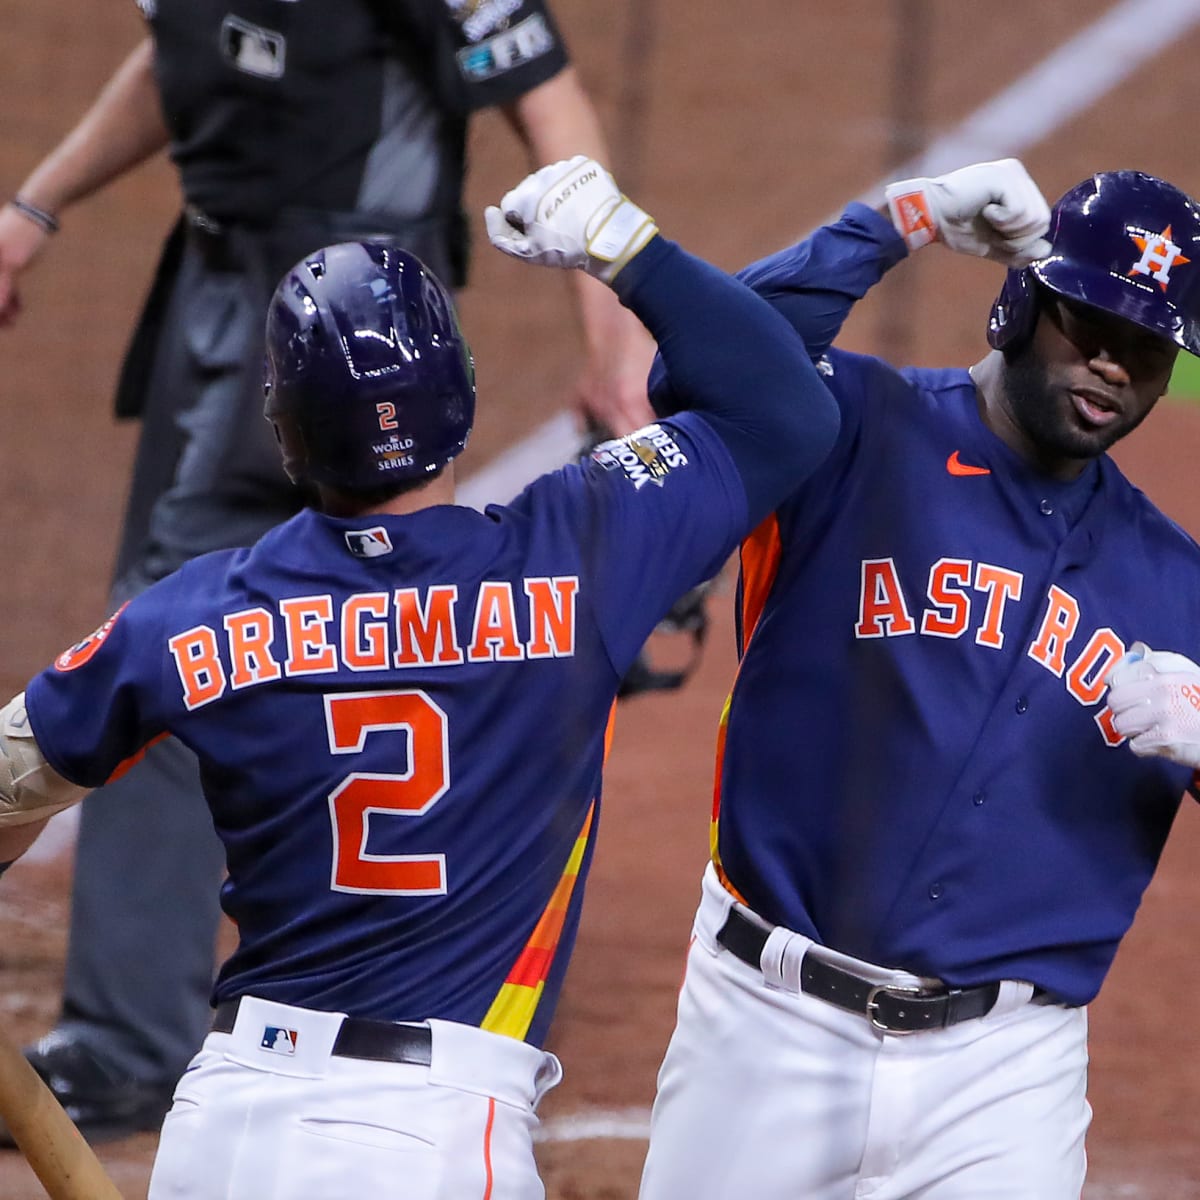 Trio of consecutive homers lift Marlins over Astros 5-1